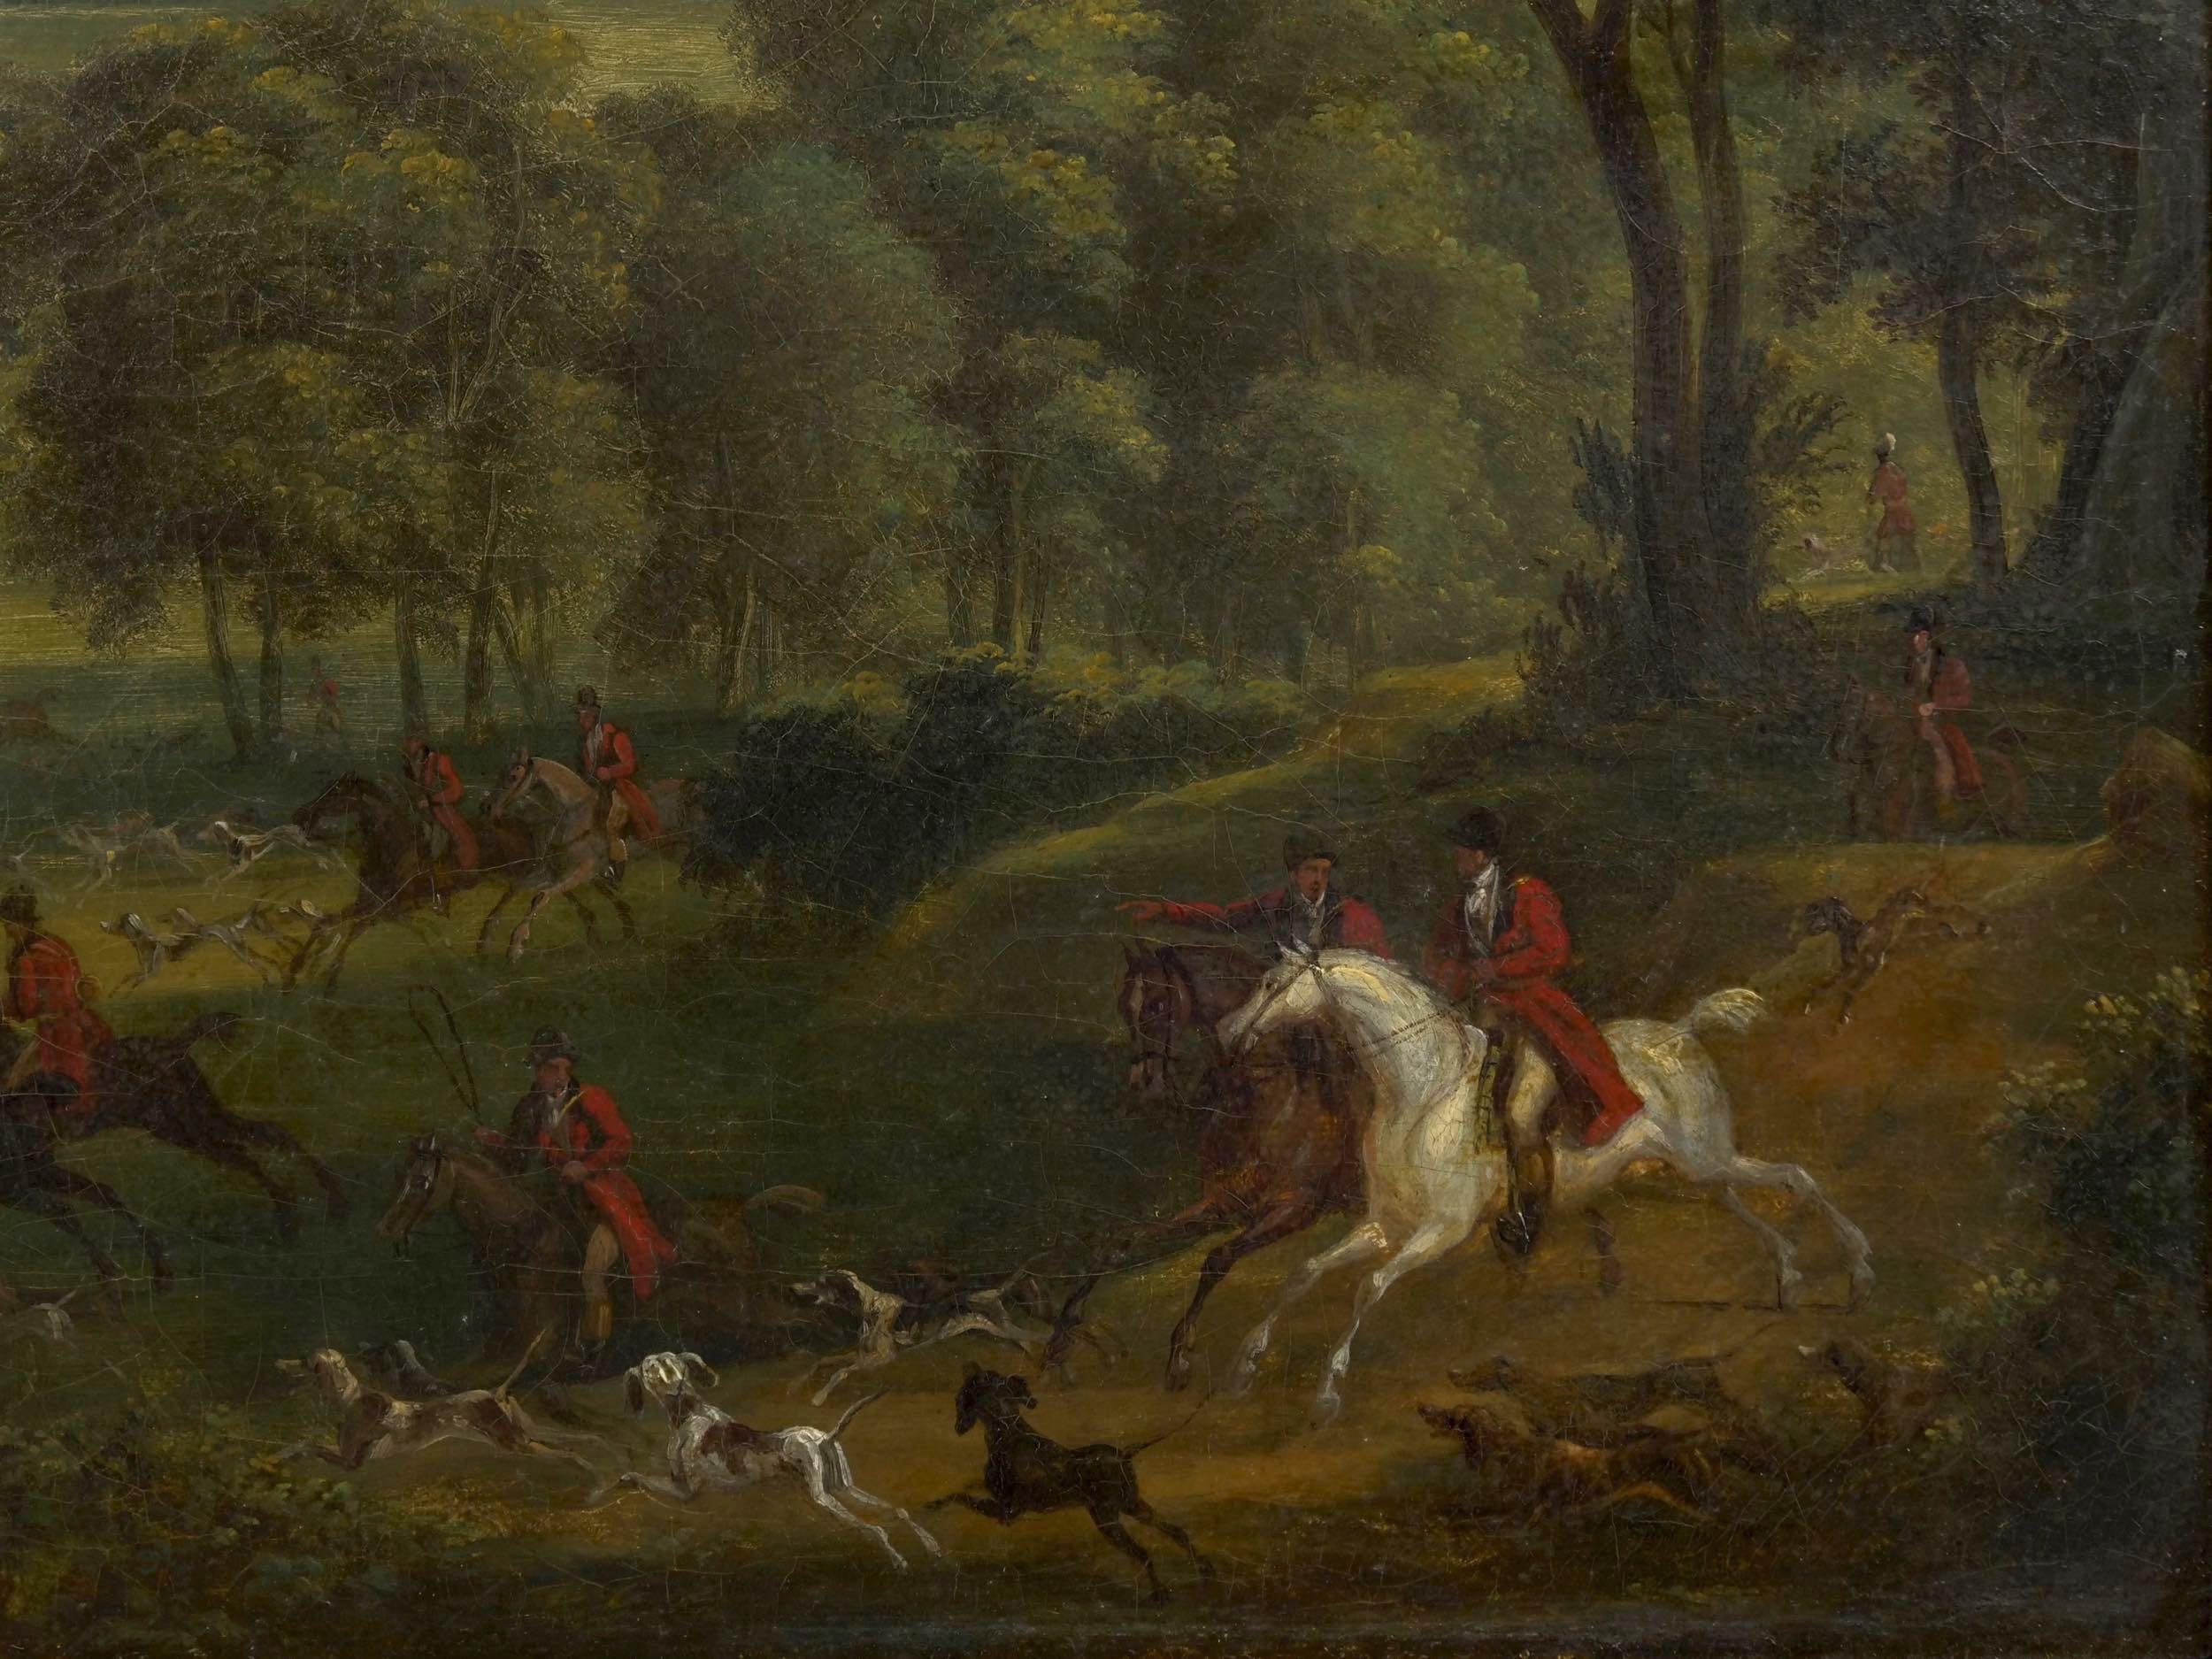 British Colonial British School Antique Oil Landscape Painting of “A Hunting Party